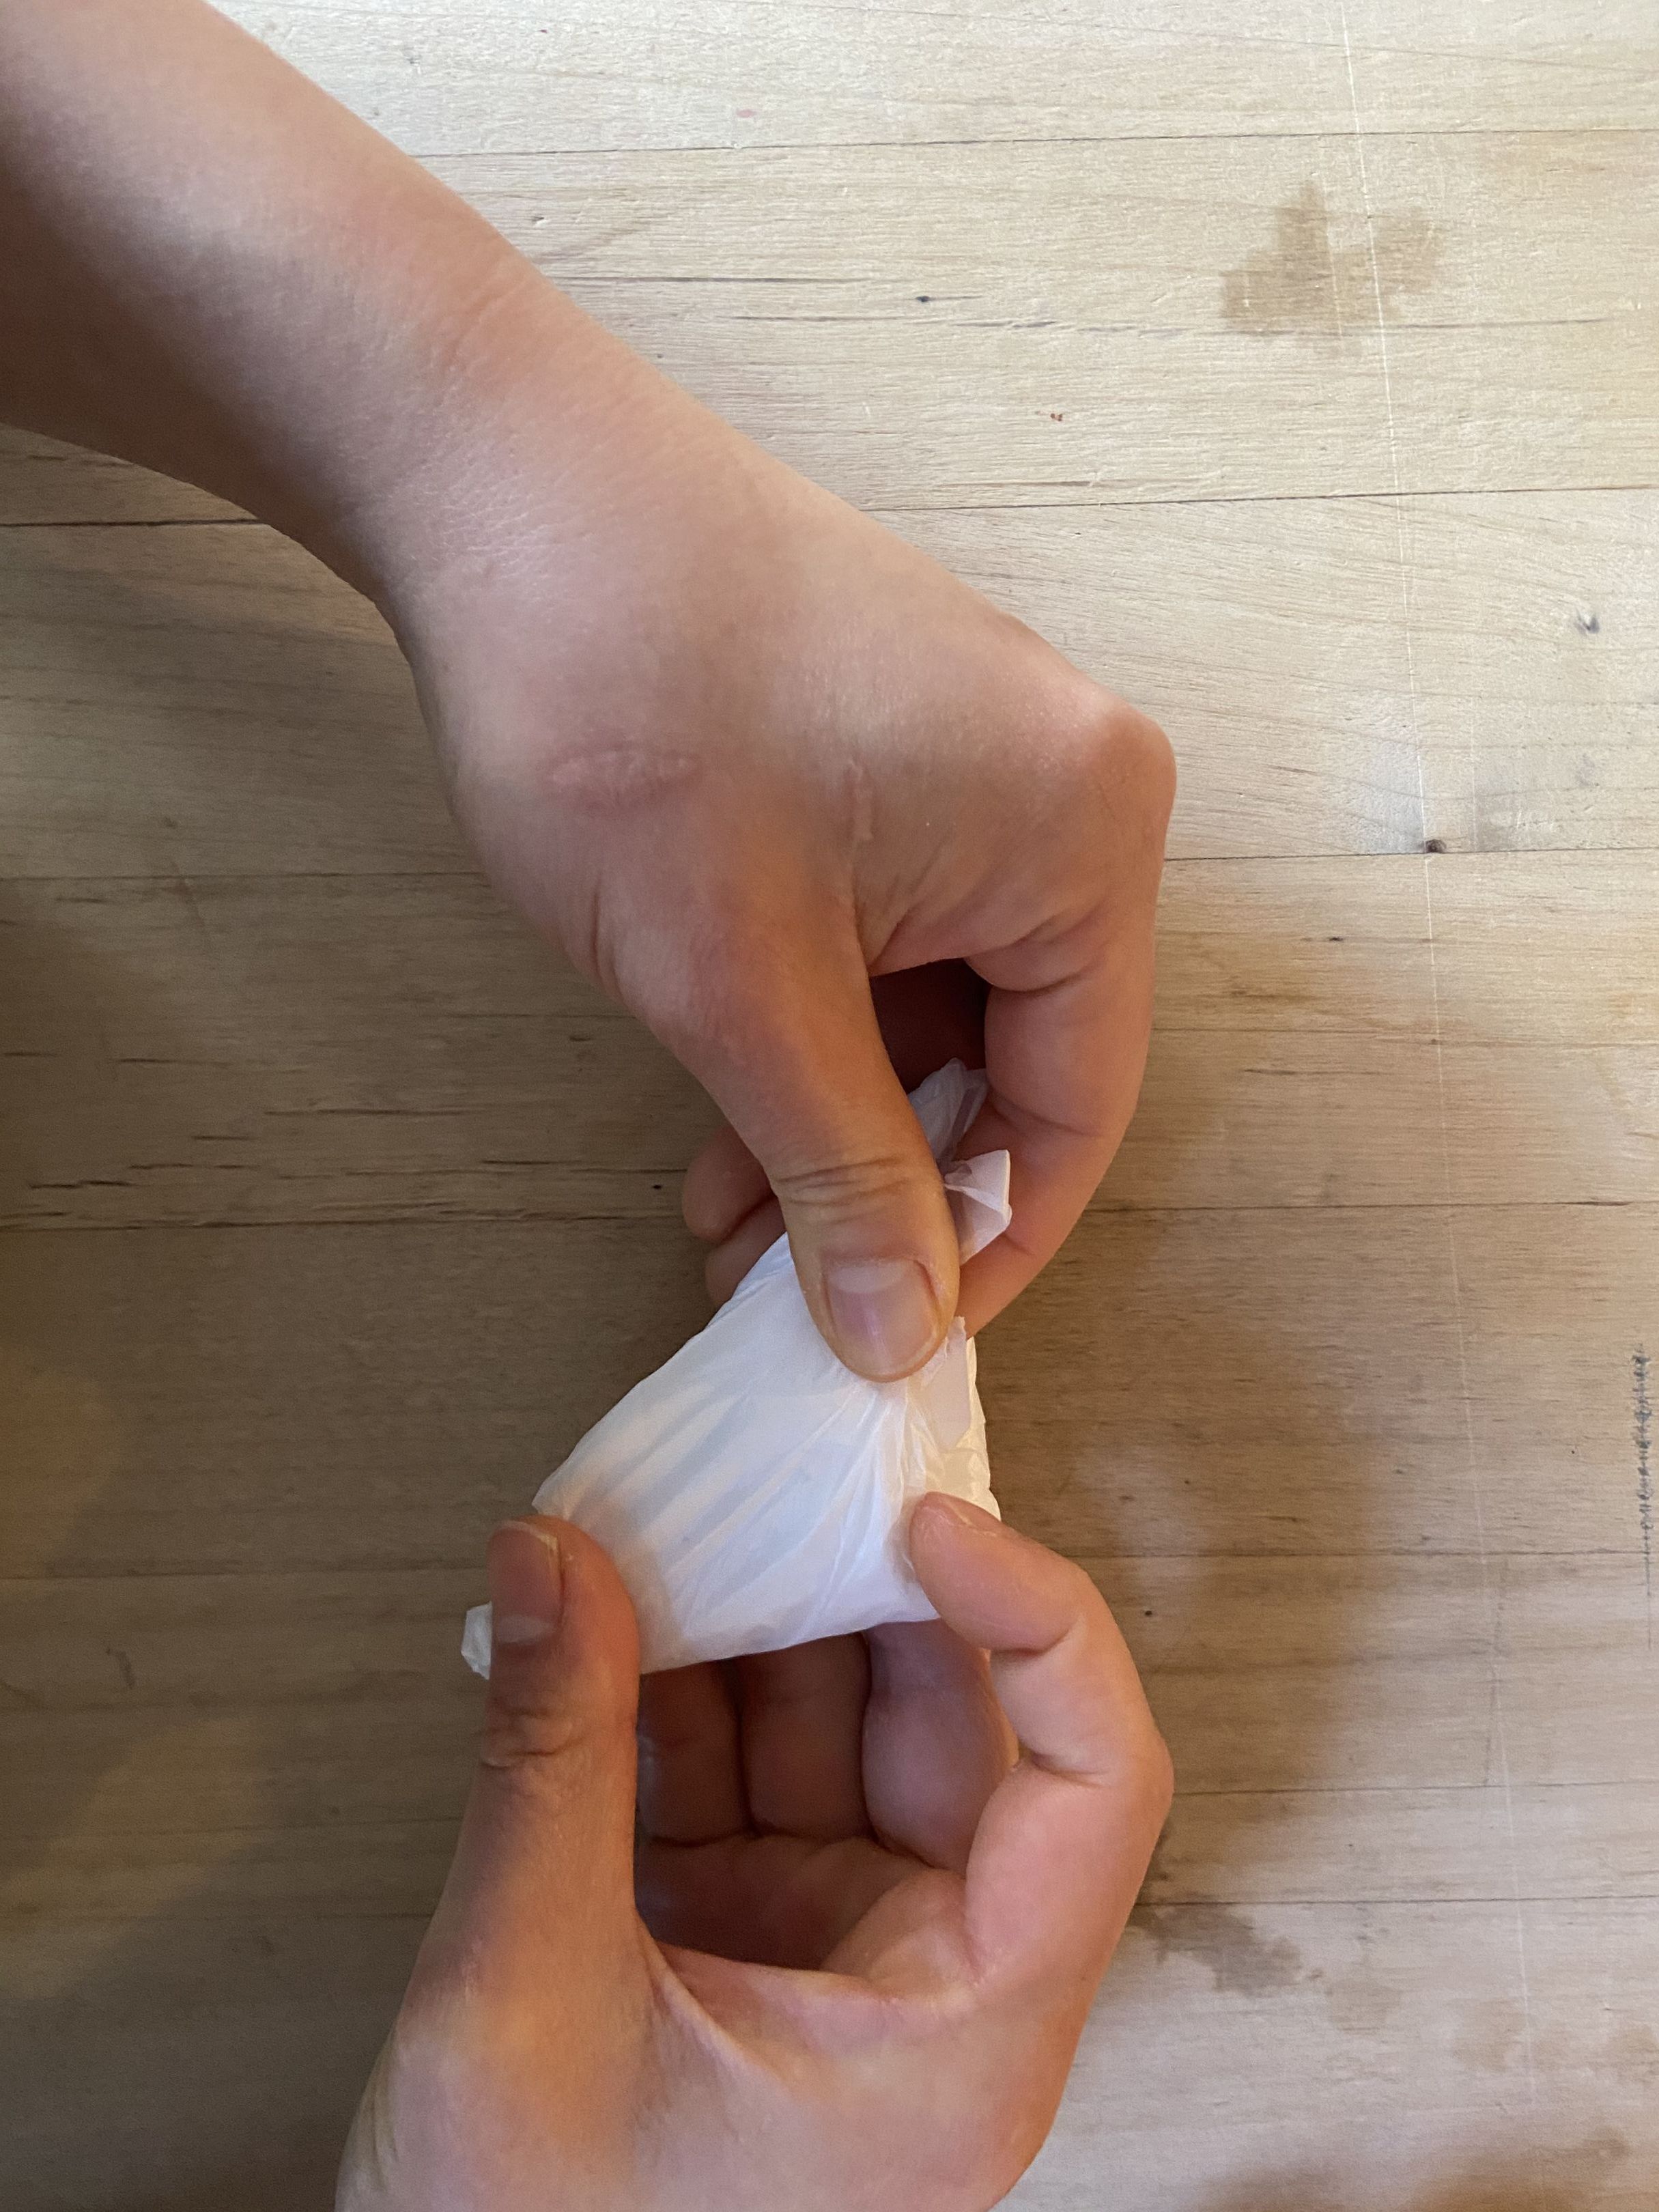 A Neat Folding Trick for Storing Plastic Grocery Bags—So You Can Actually Reuse Them